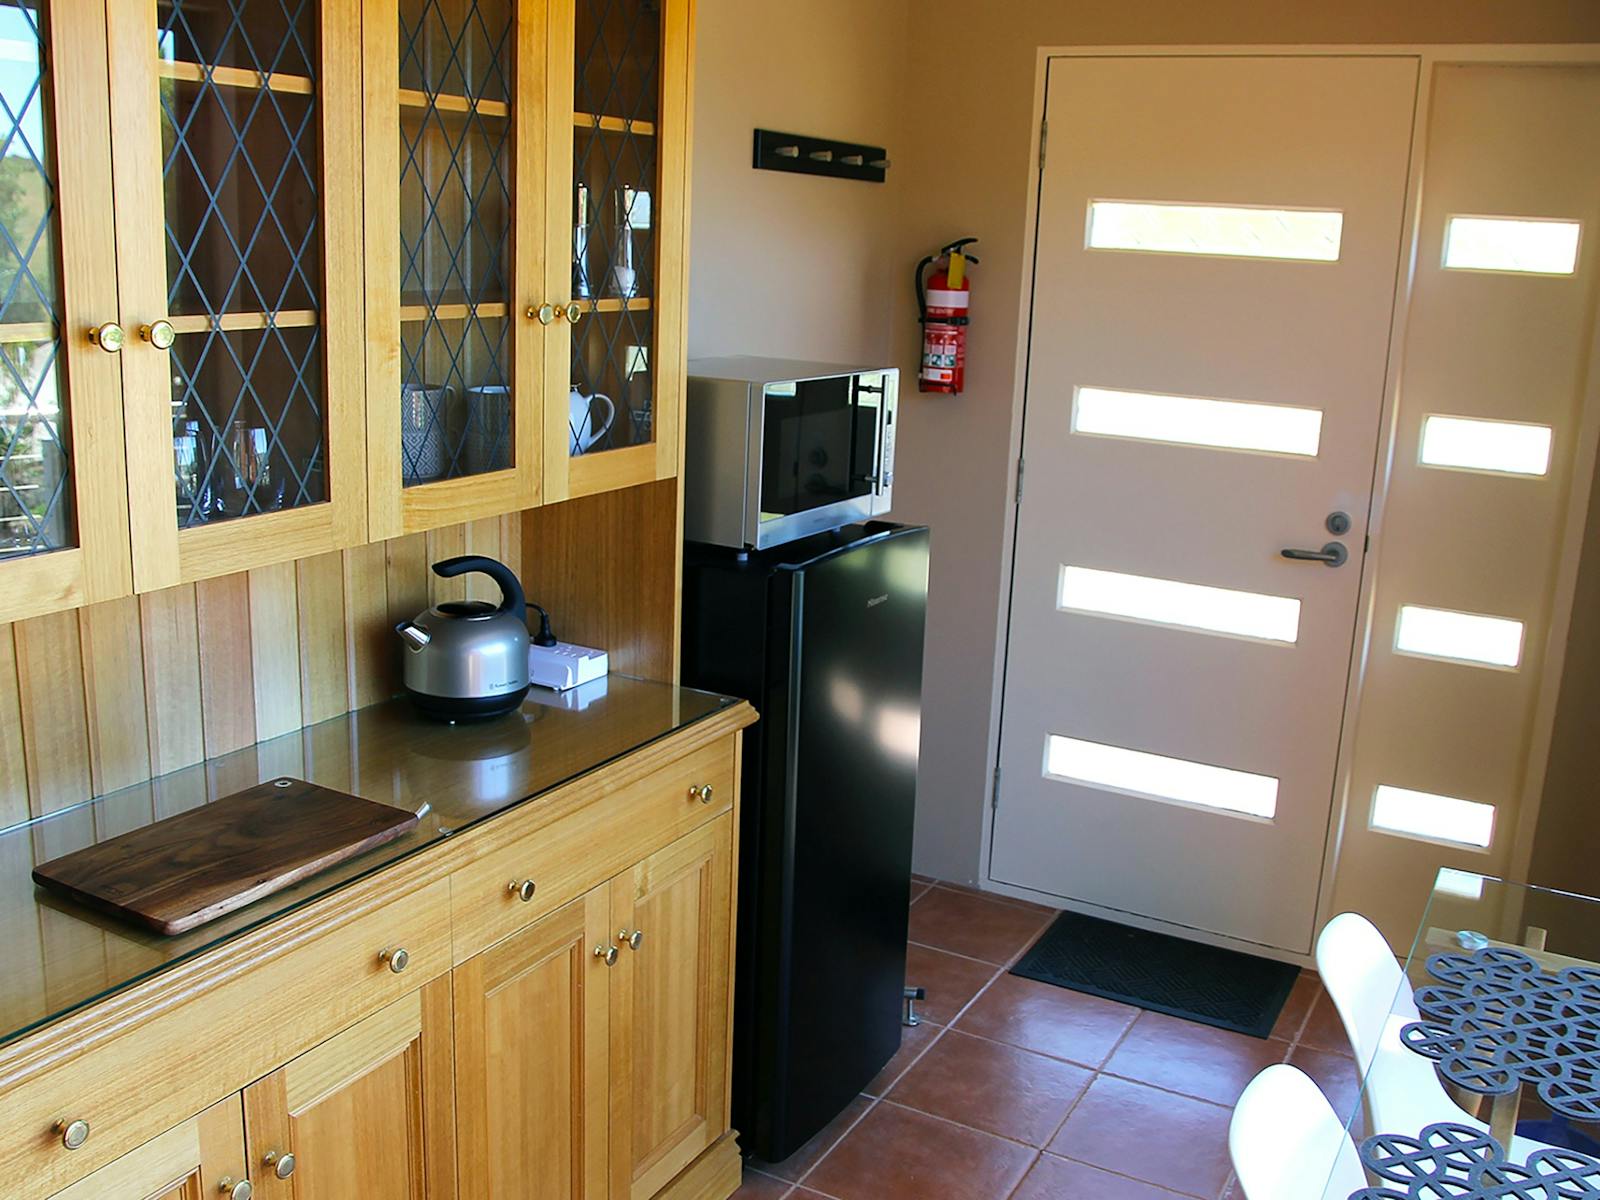 Kitchenette view. Fridge freezer, microwave and continental breakfast available.